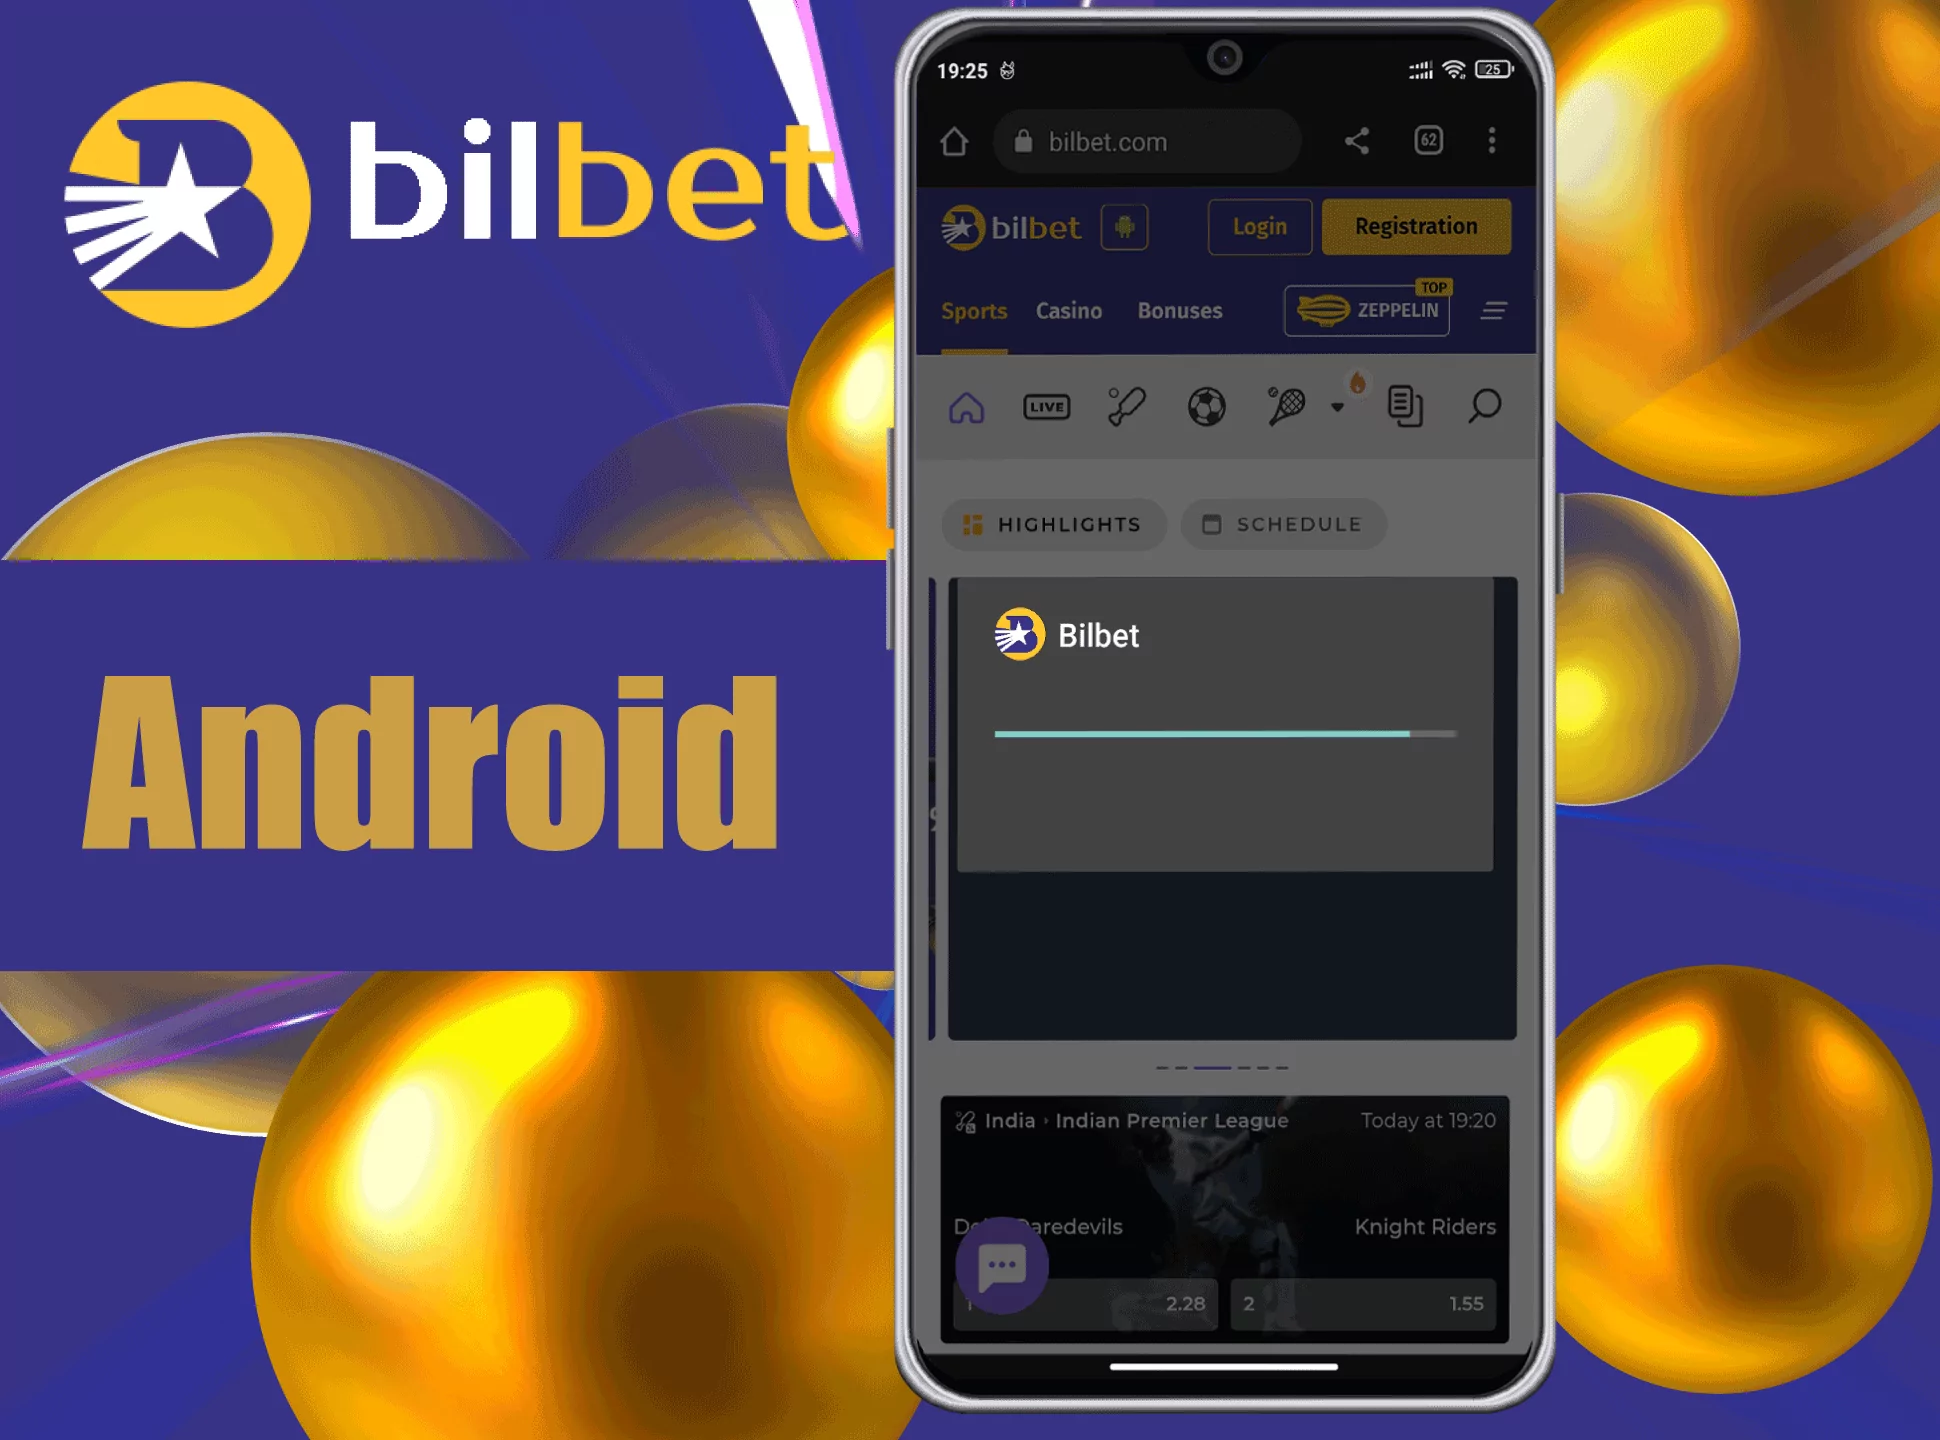 Visit the Bilbet official website and download the apk file.